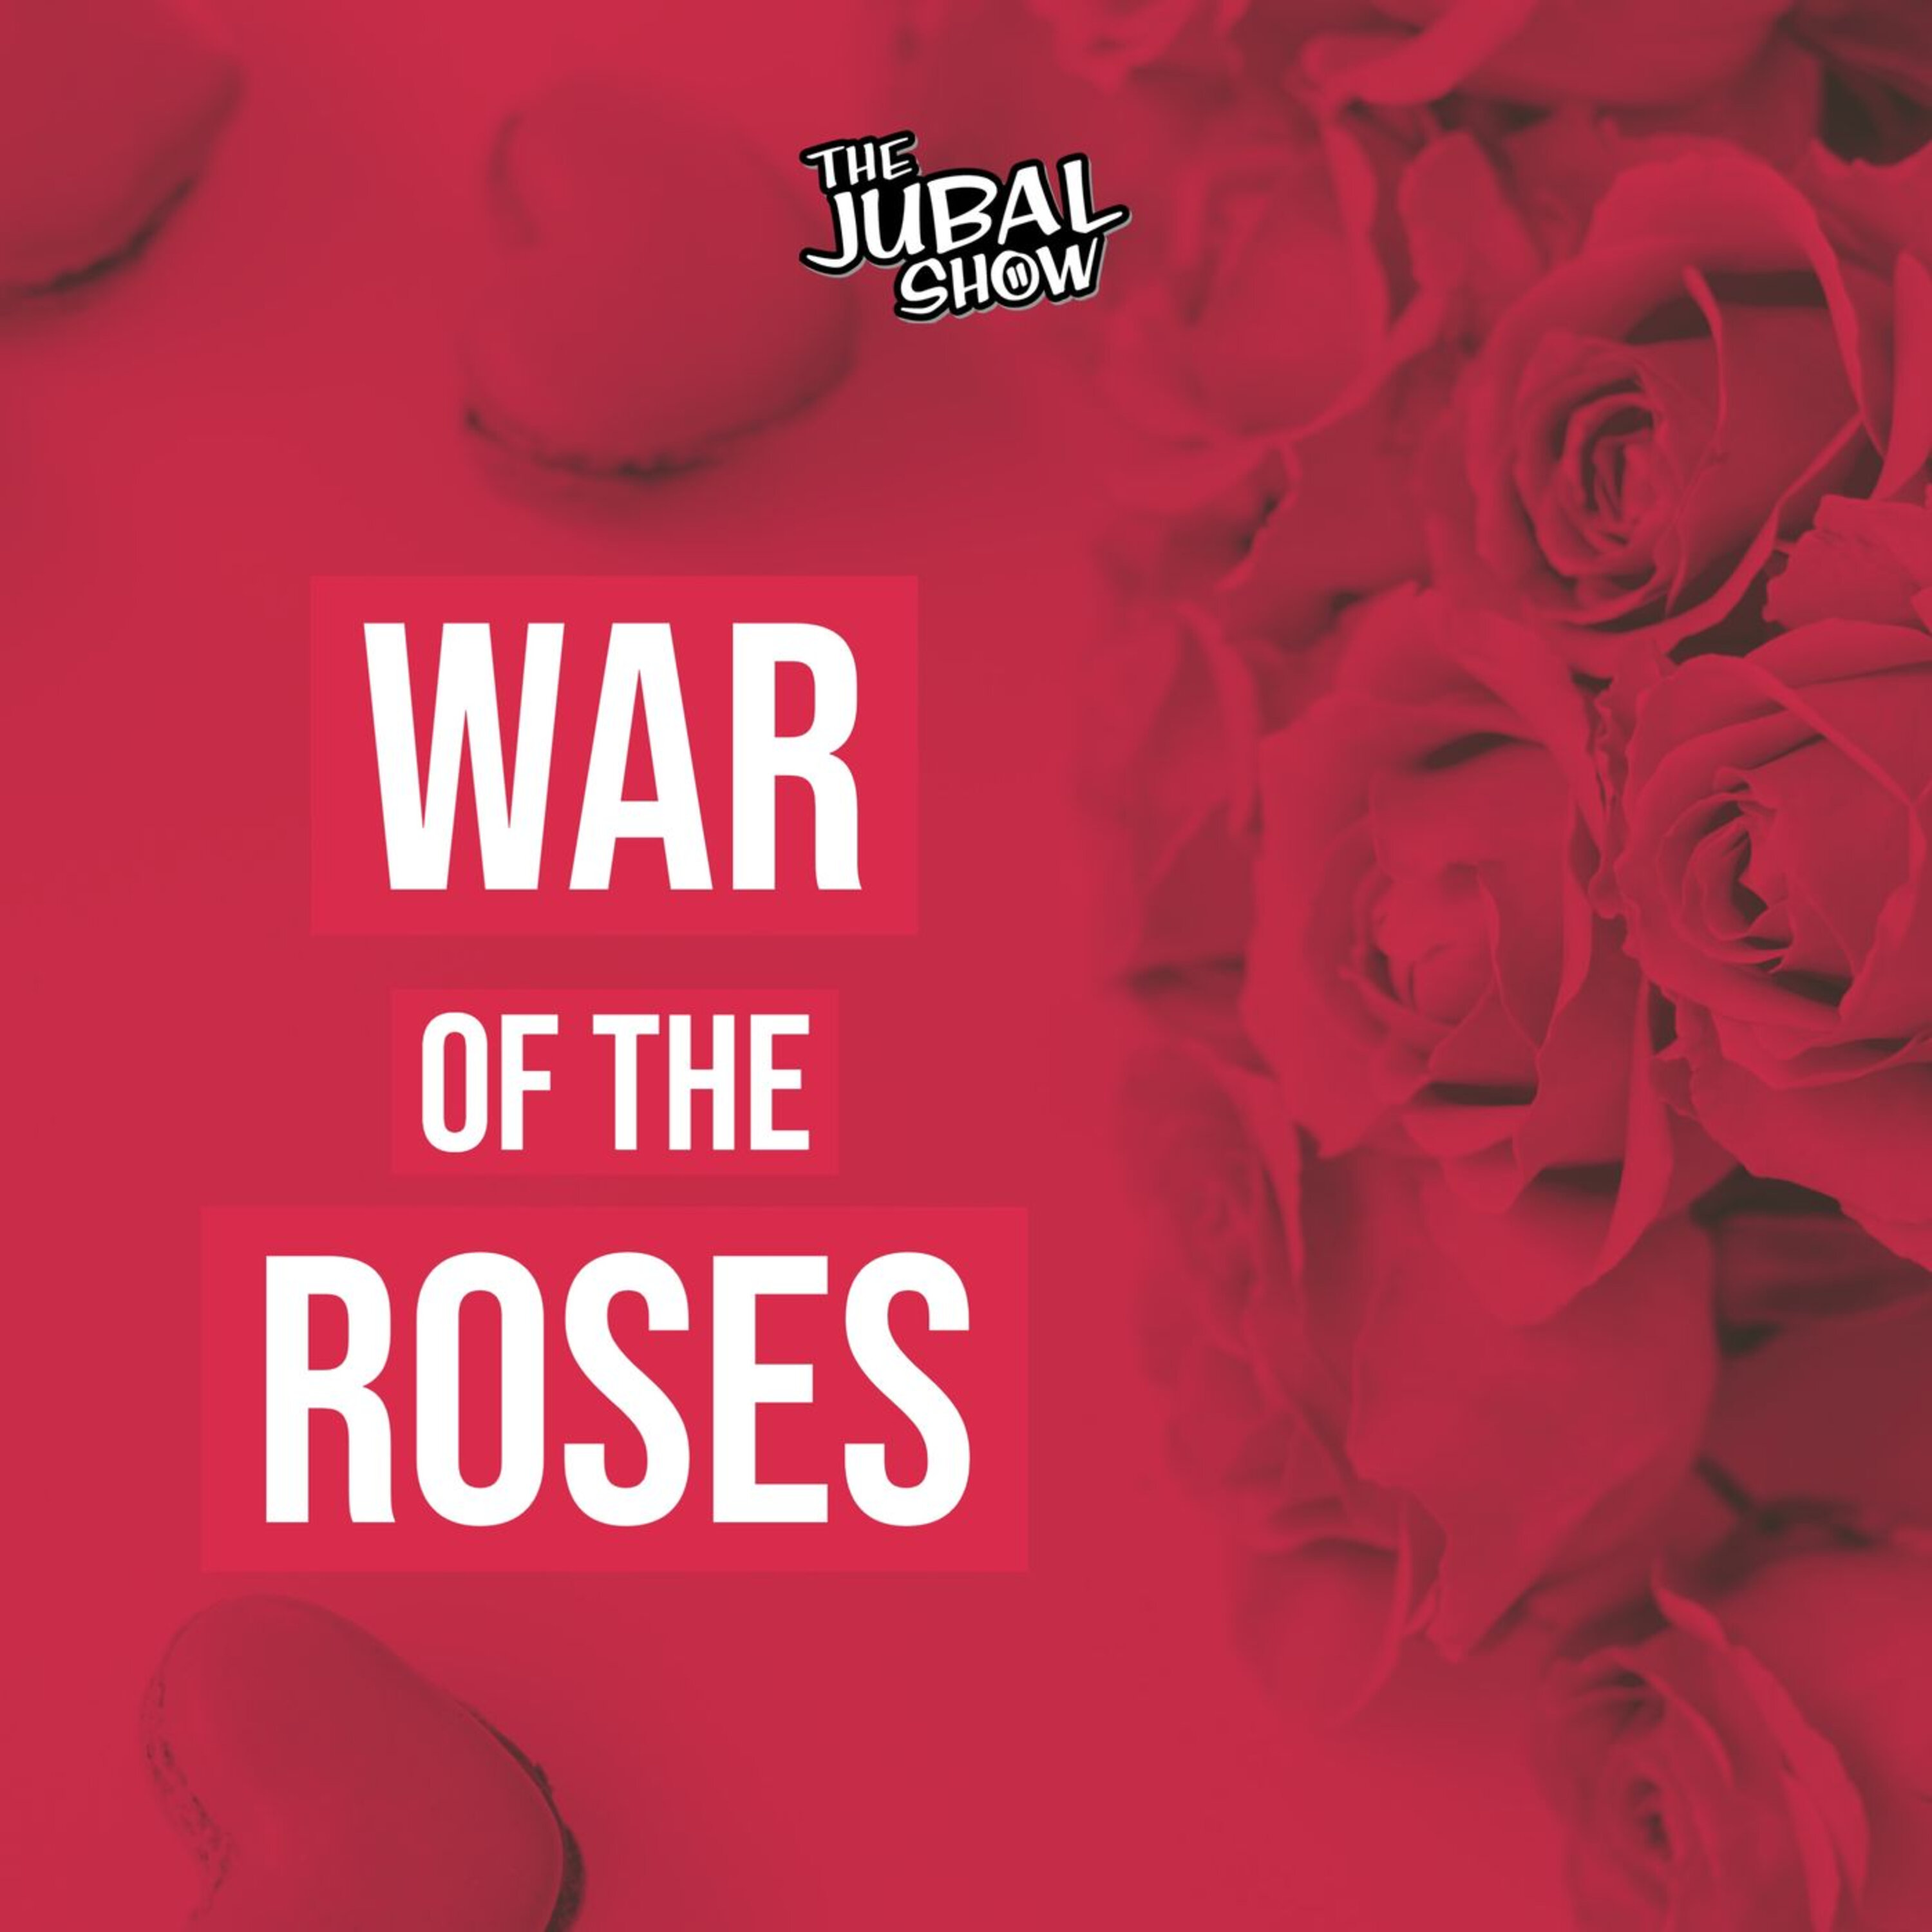 What do you think about the phone in this War of the Roses!